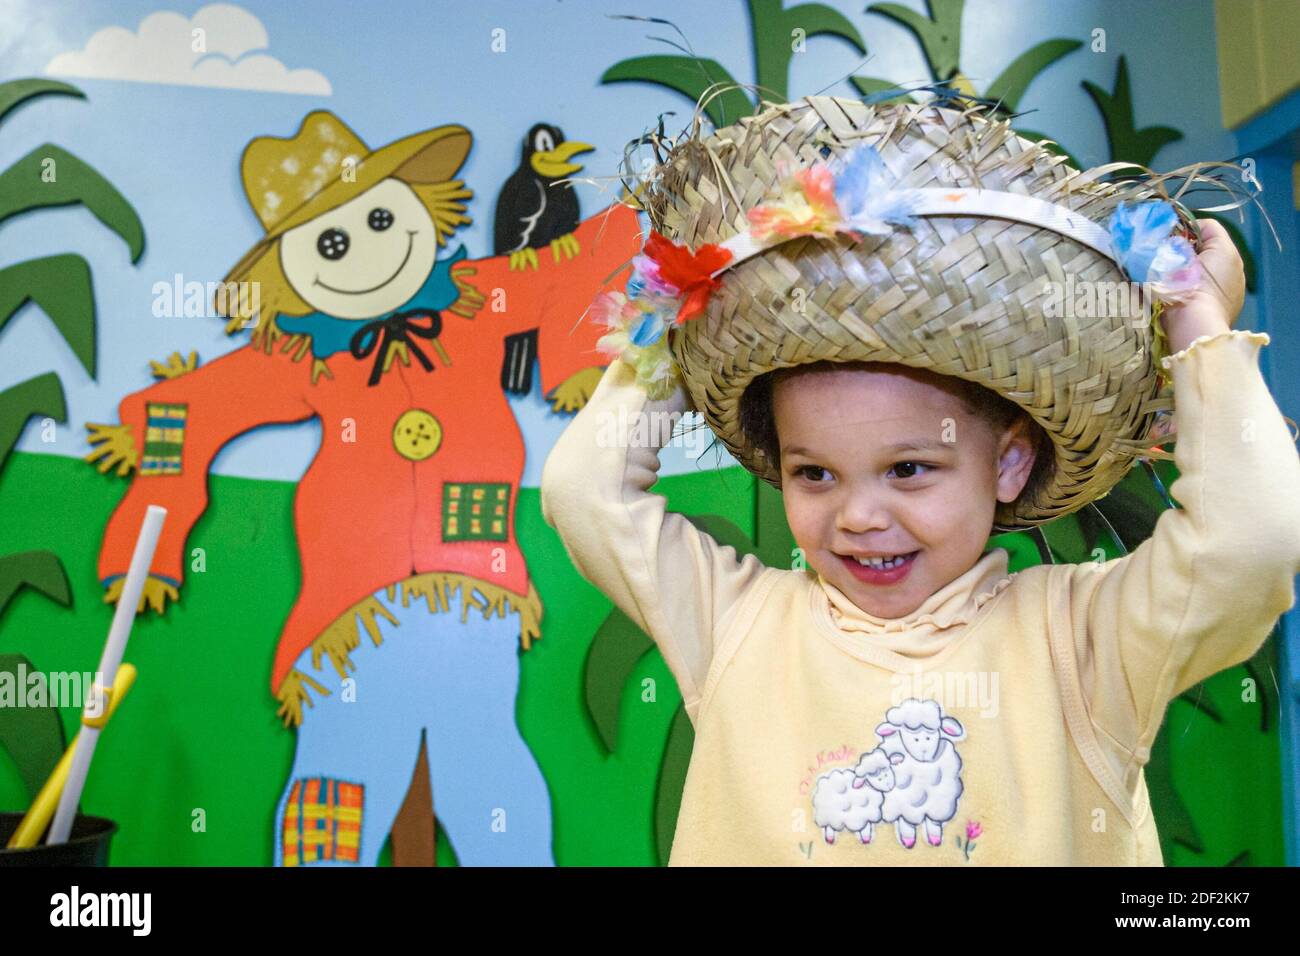 Huntsville Alabama,EarlyWorks Children Museum,hands on learning activities,girl wearing straw hat, Stock Photo